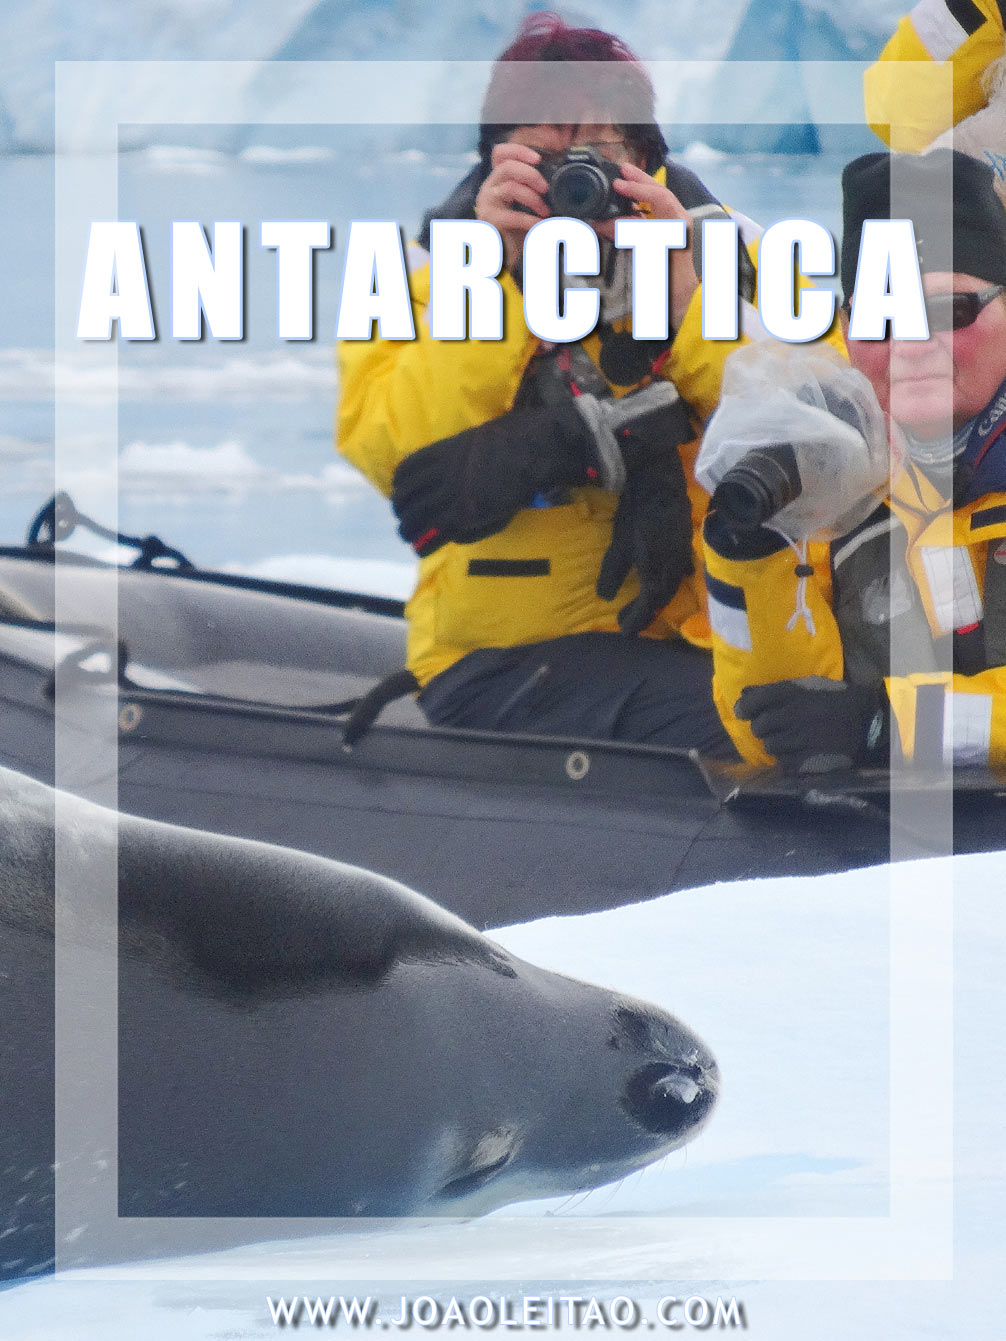 What to Do in Antarctica